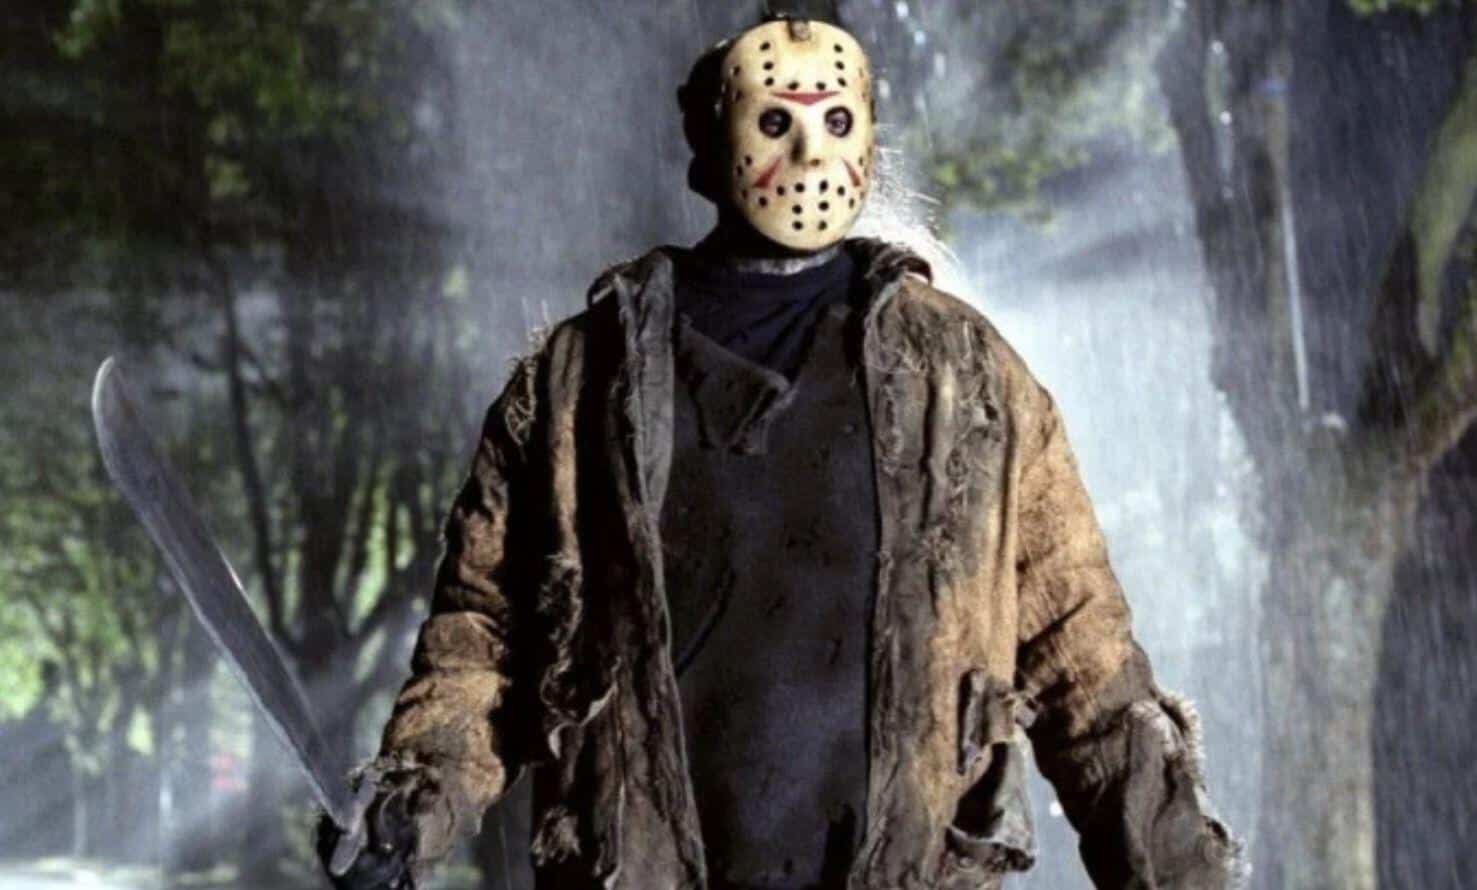 Friday the 13th Jason Voorhees